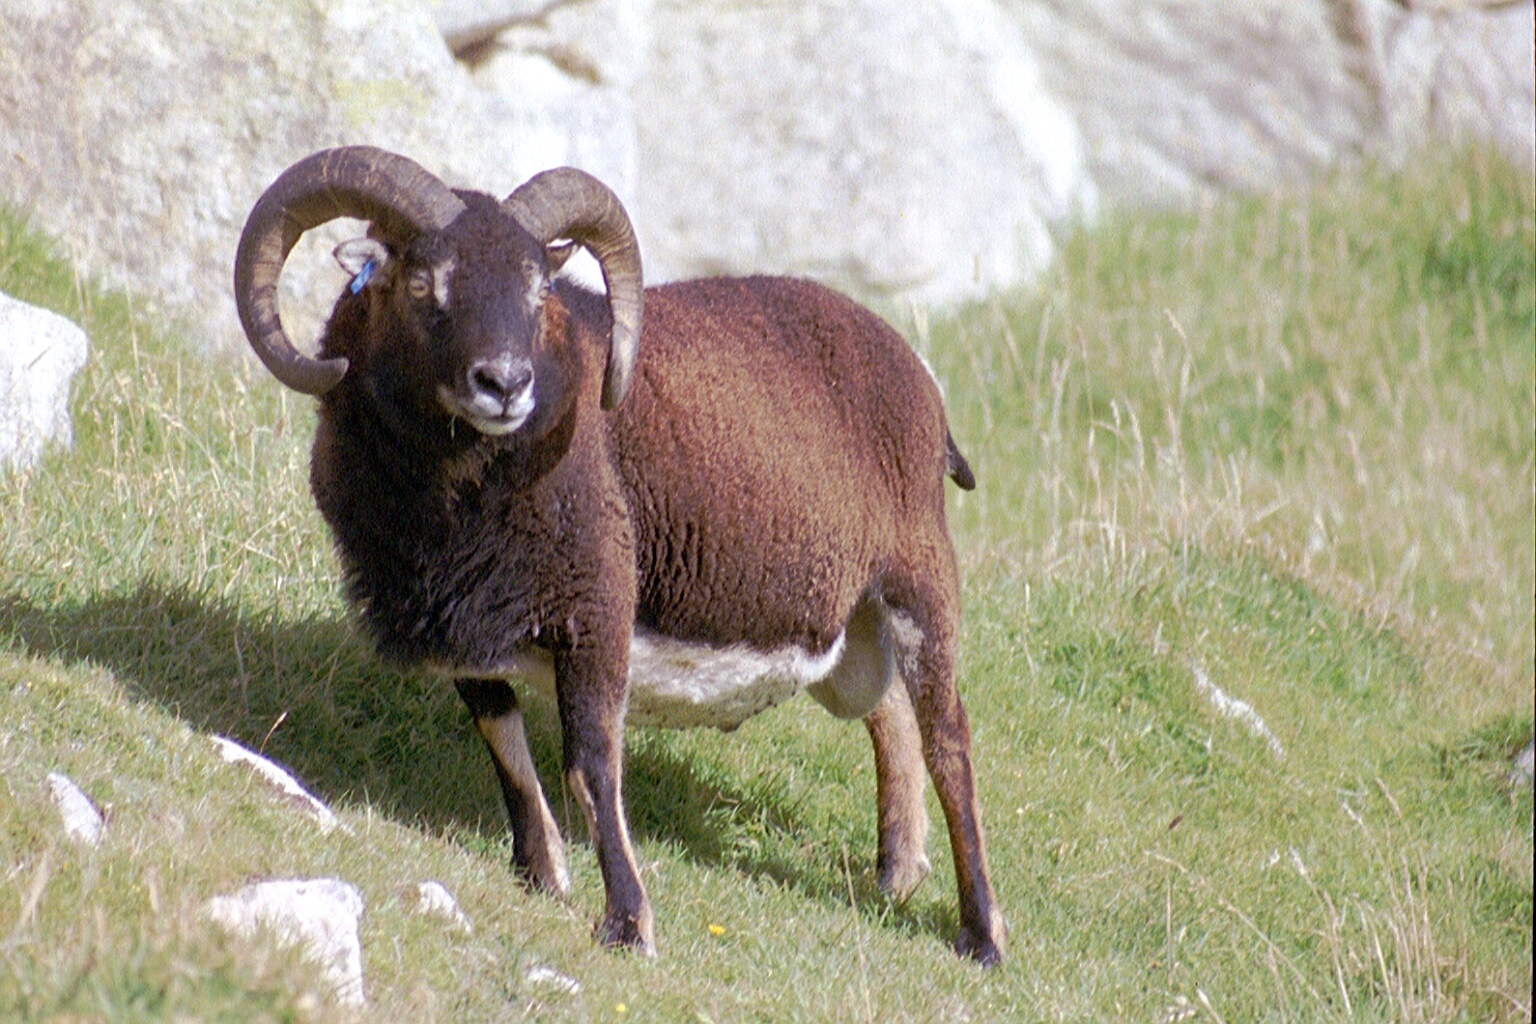 A male Soay sheep (*Ovis aries*). Photo by [Owen Jones](https://www.flickr.com/photos/jonesor/), [CC BY-NC-SA 2.0](https://creativecommons.org/licenses/by-nc-sa/2.0/).